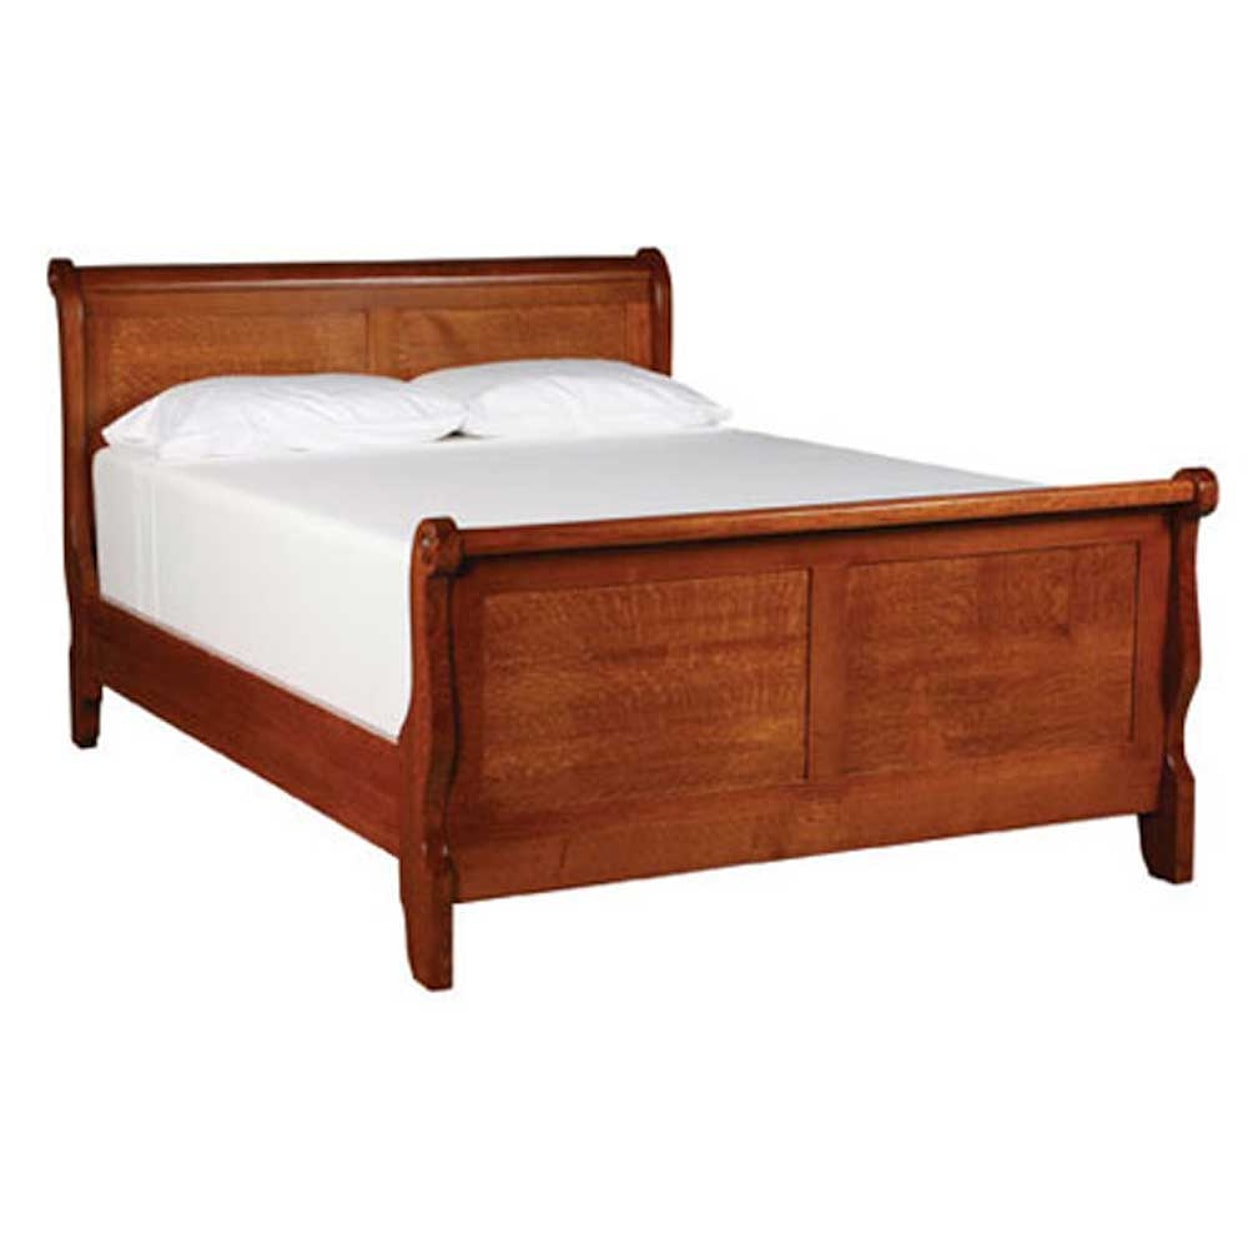 Simply Amish Empire Queen Sleigh Bed